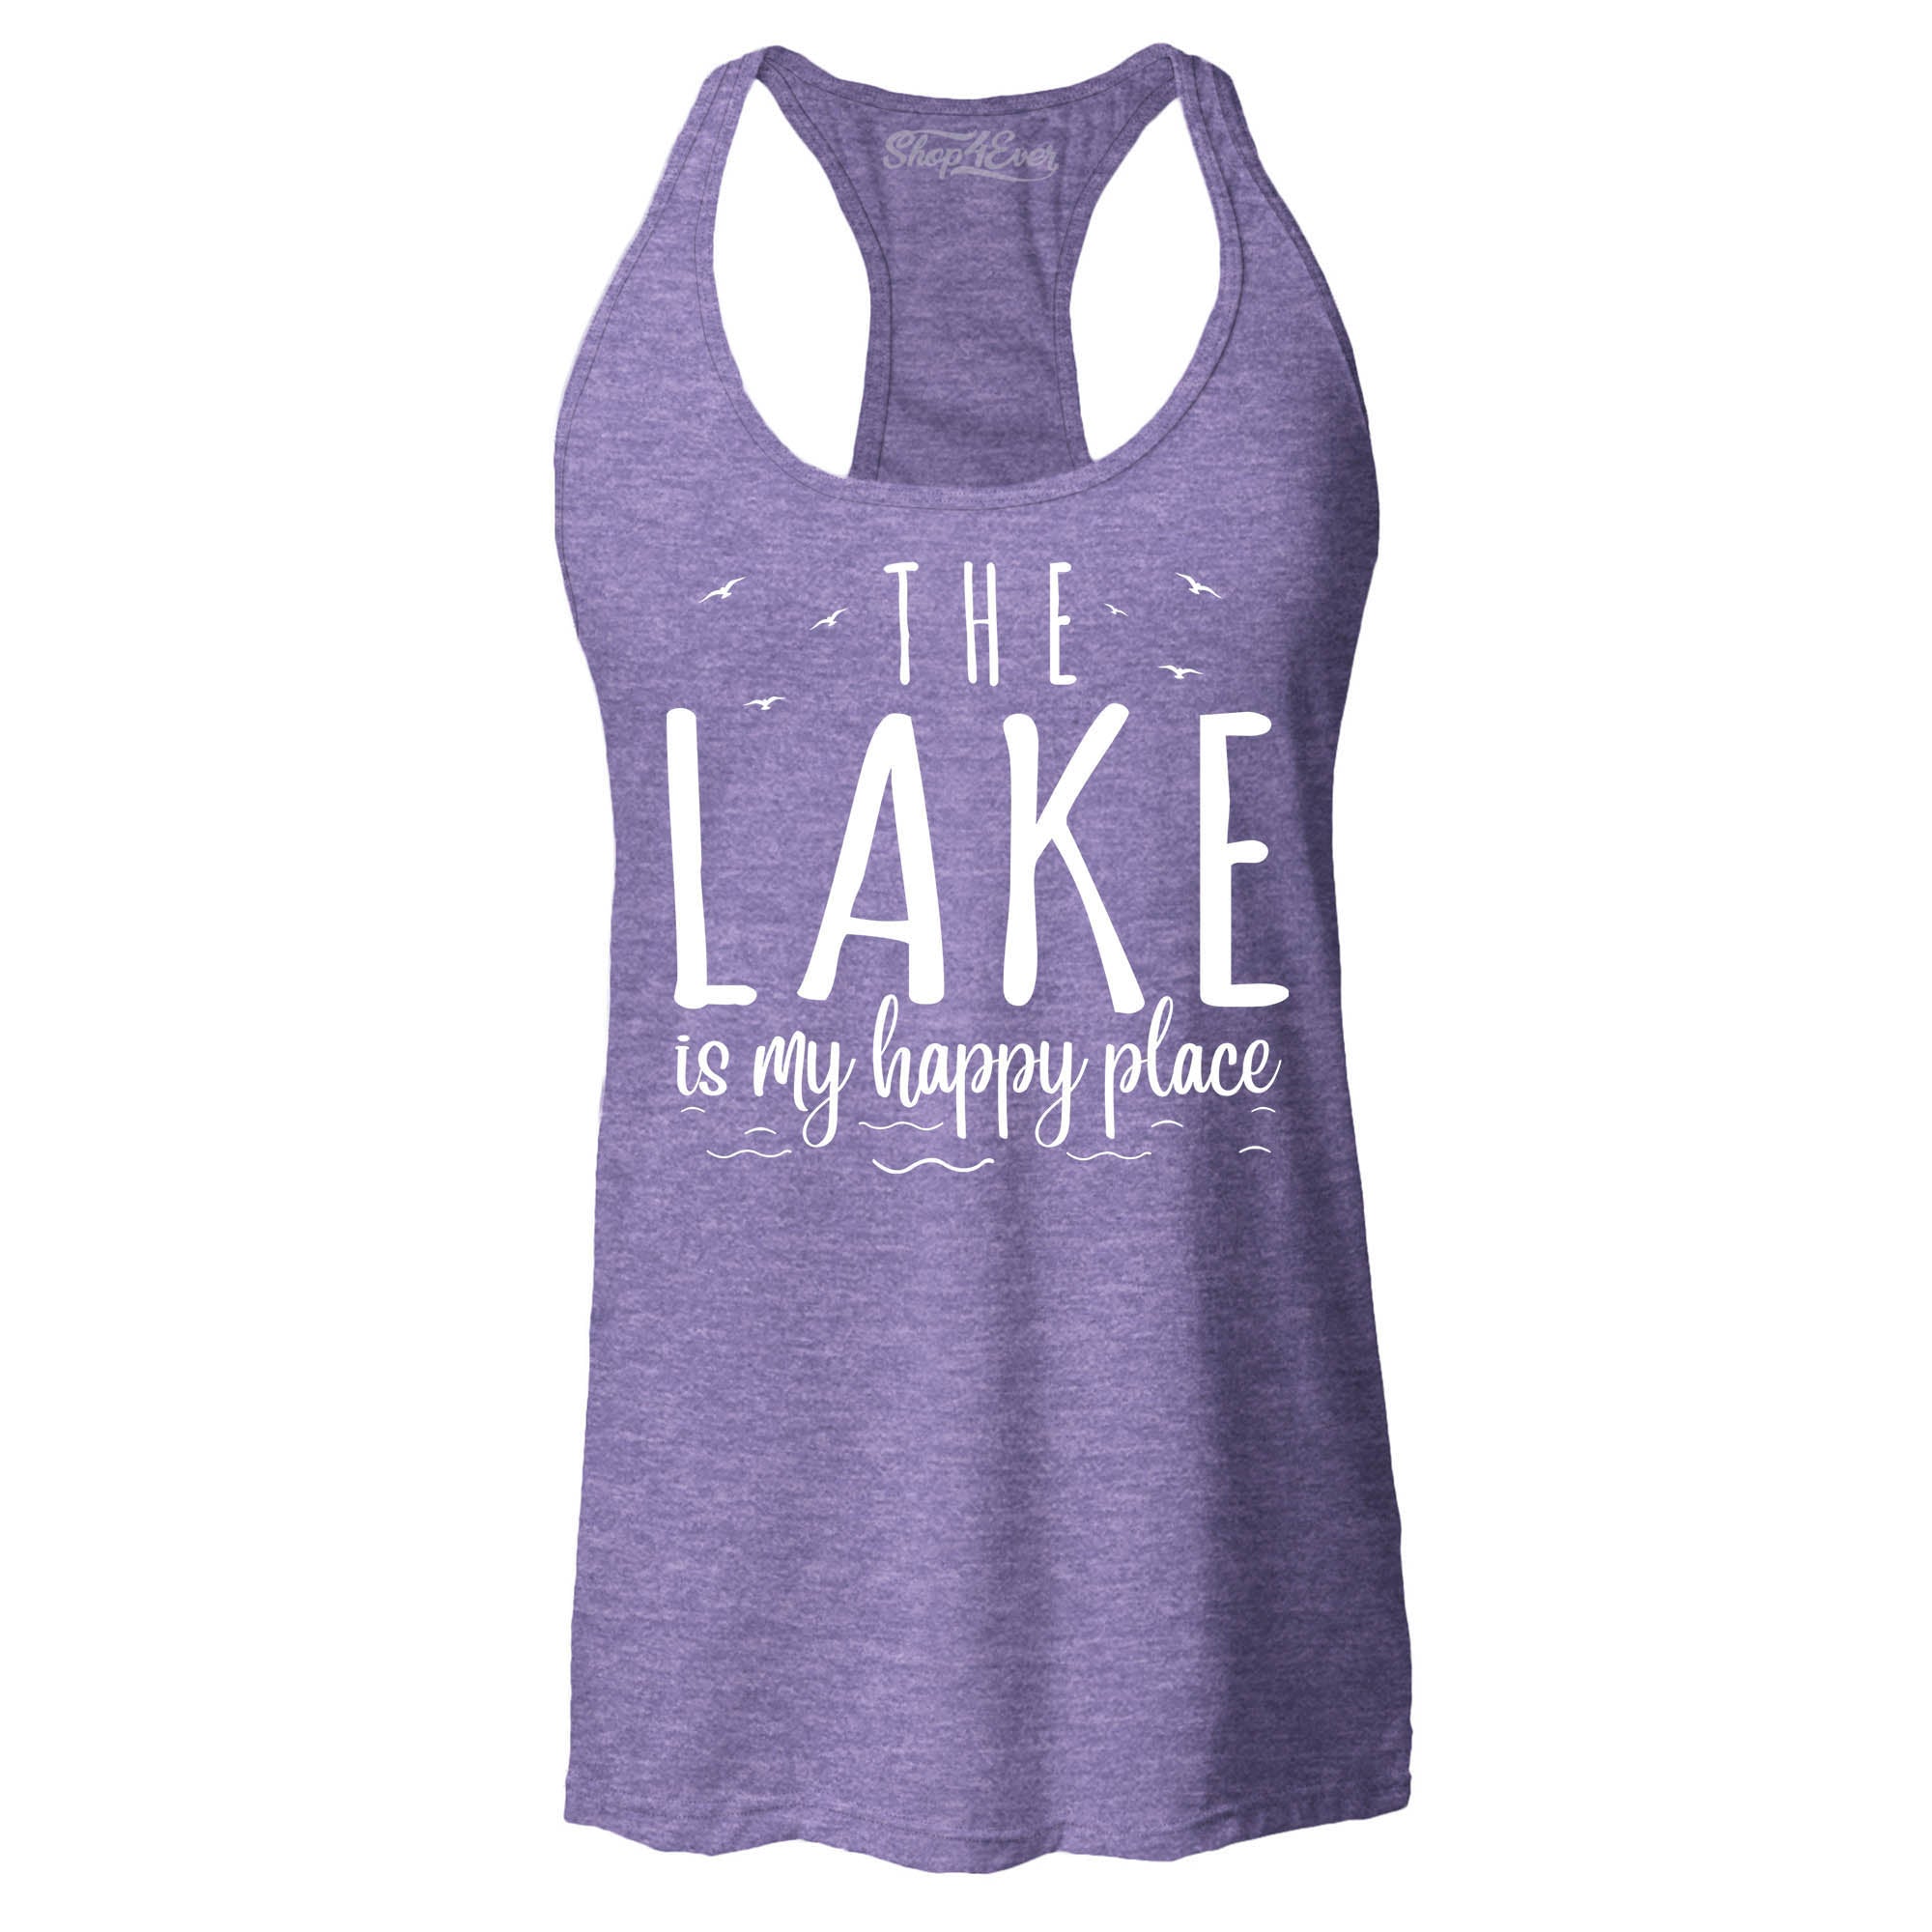 The Lake is My Happy Place Women's Racerback Tank Top Slim Fit